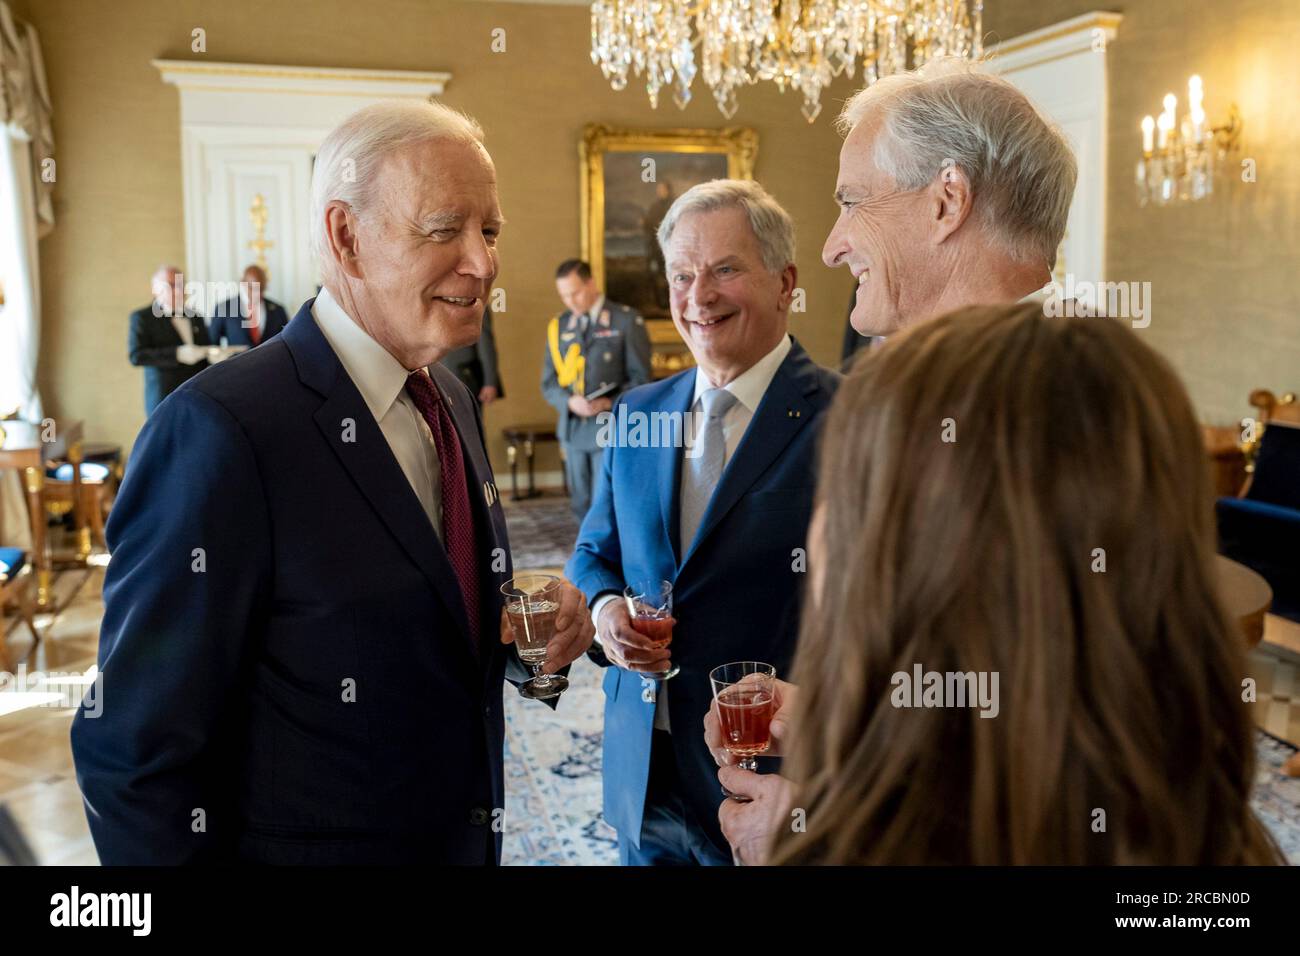 Helsinki, Finland. 13th July, 2023. U.S President Joe Biden, left, chats with Norwegian Prime Minister Jonas Gahr Store, Finnish President Sauli Niinisto, center, and Iceland Prime Minister Katrin Jakobsdottir, right, during a reception for the US-Nordic Leaders Summit at the presidential palace, July 13, 2023 in Helsinki, Finland. Credit: Adam Schultz/White House Photo/Alamy Live News Stock Photo